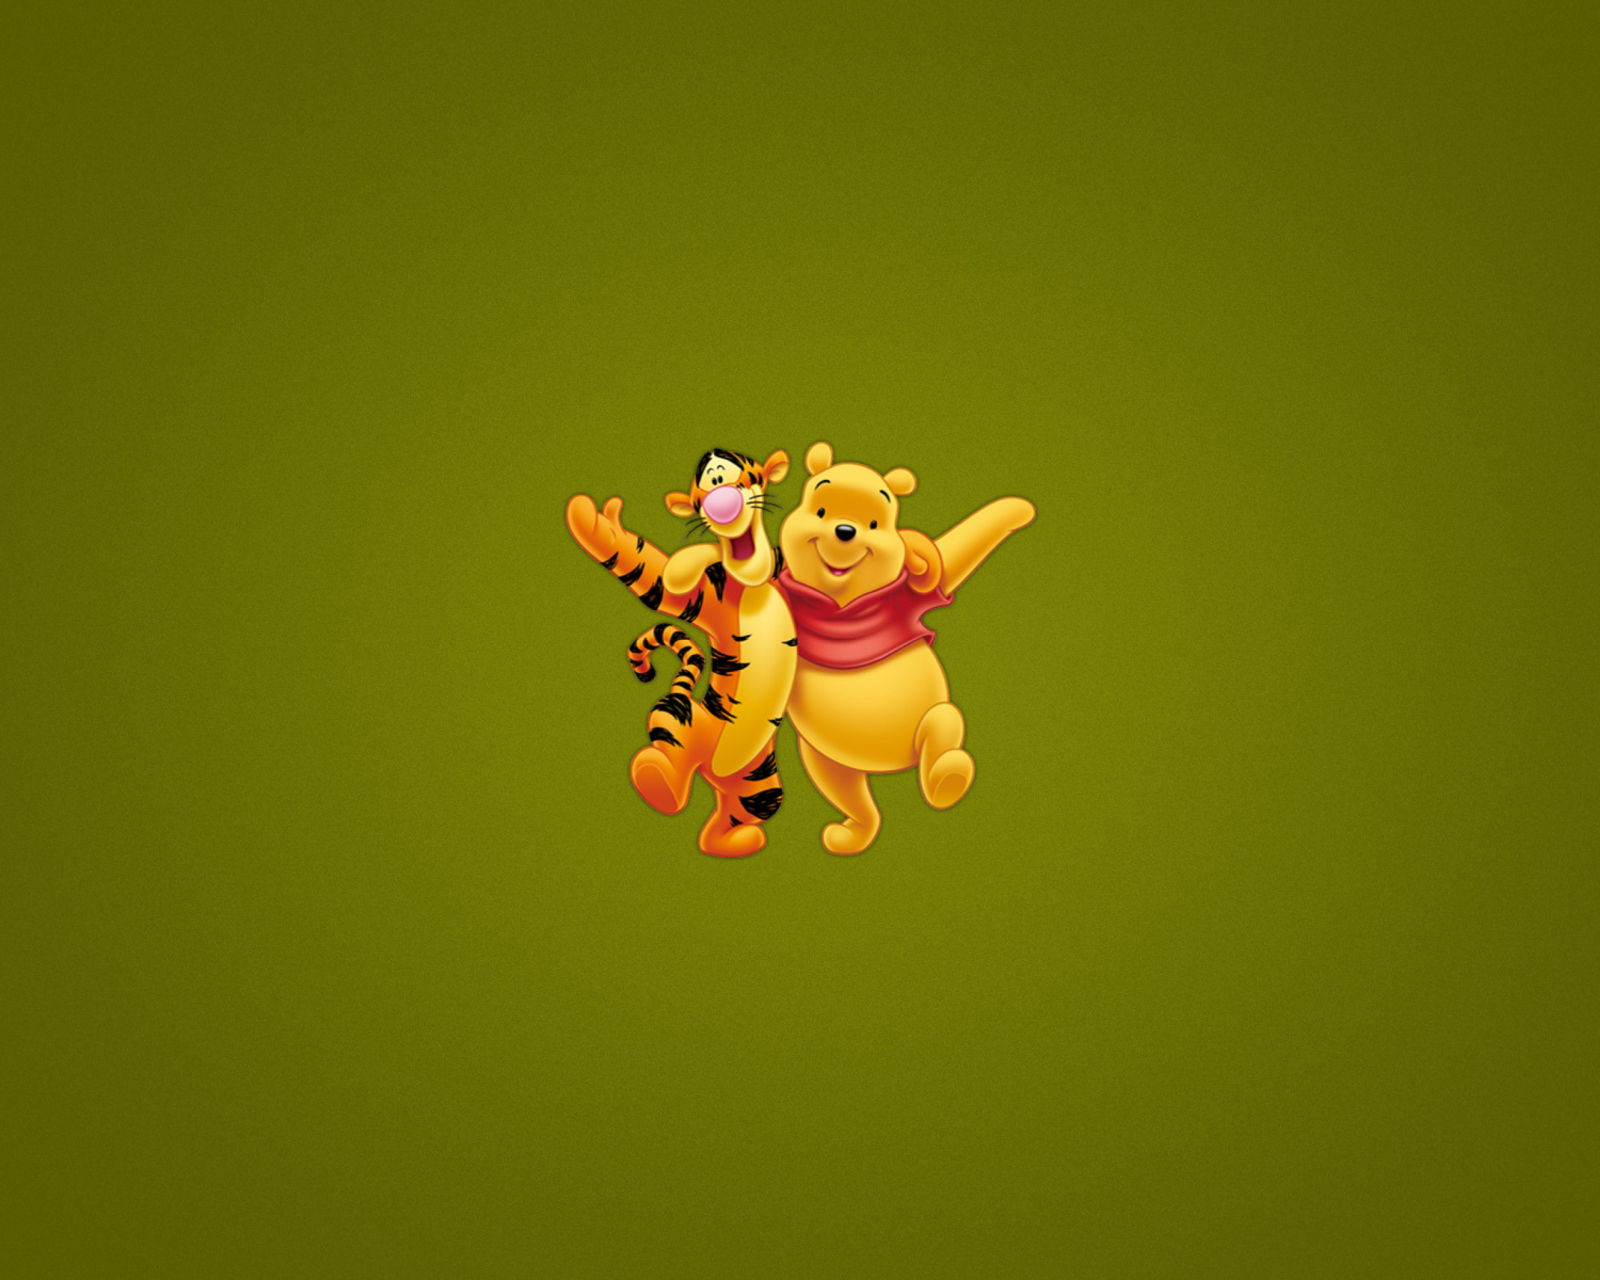 Winnie The Pooh And Tiger wallpaper 1600x1280